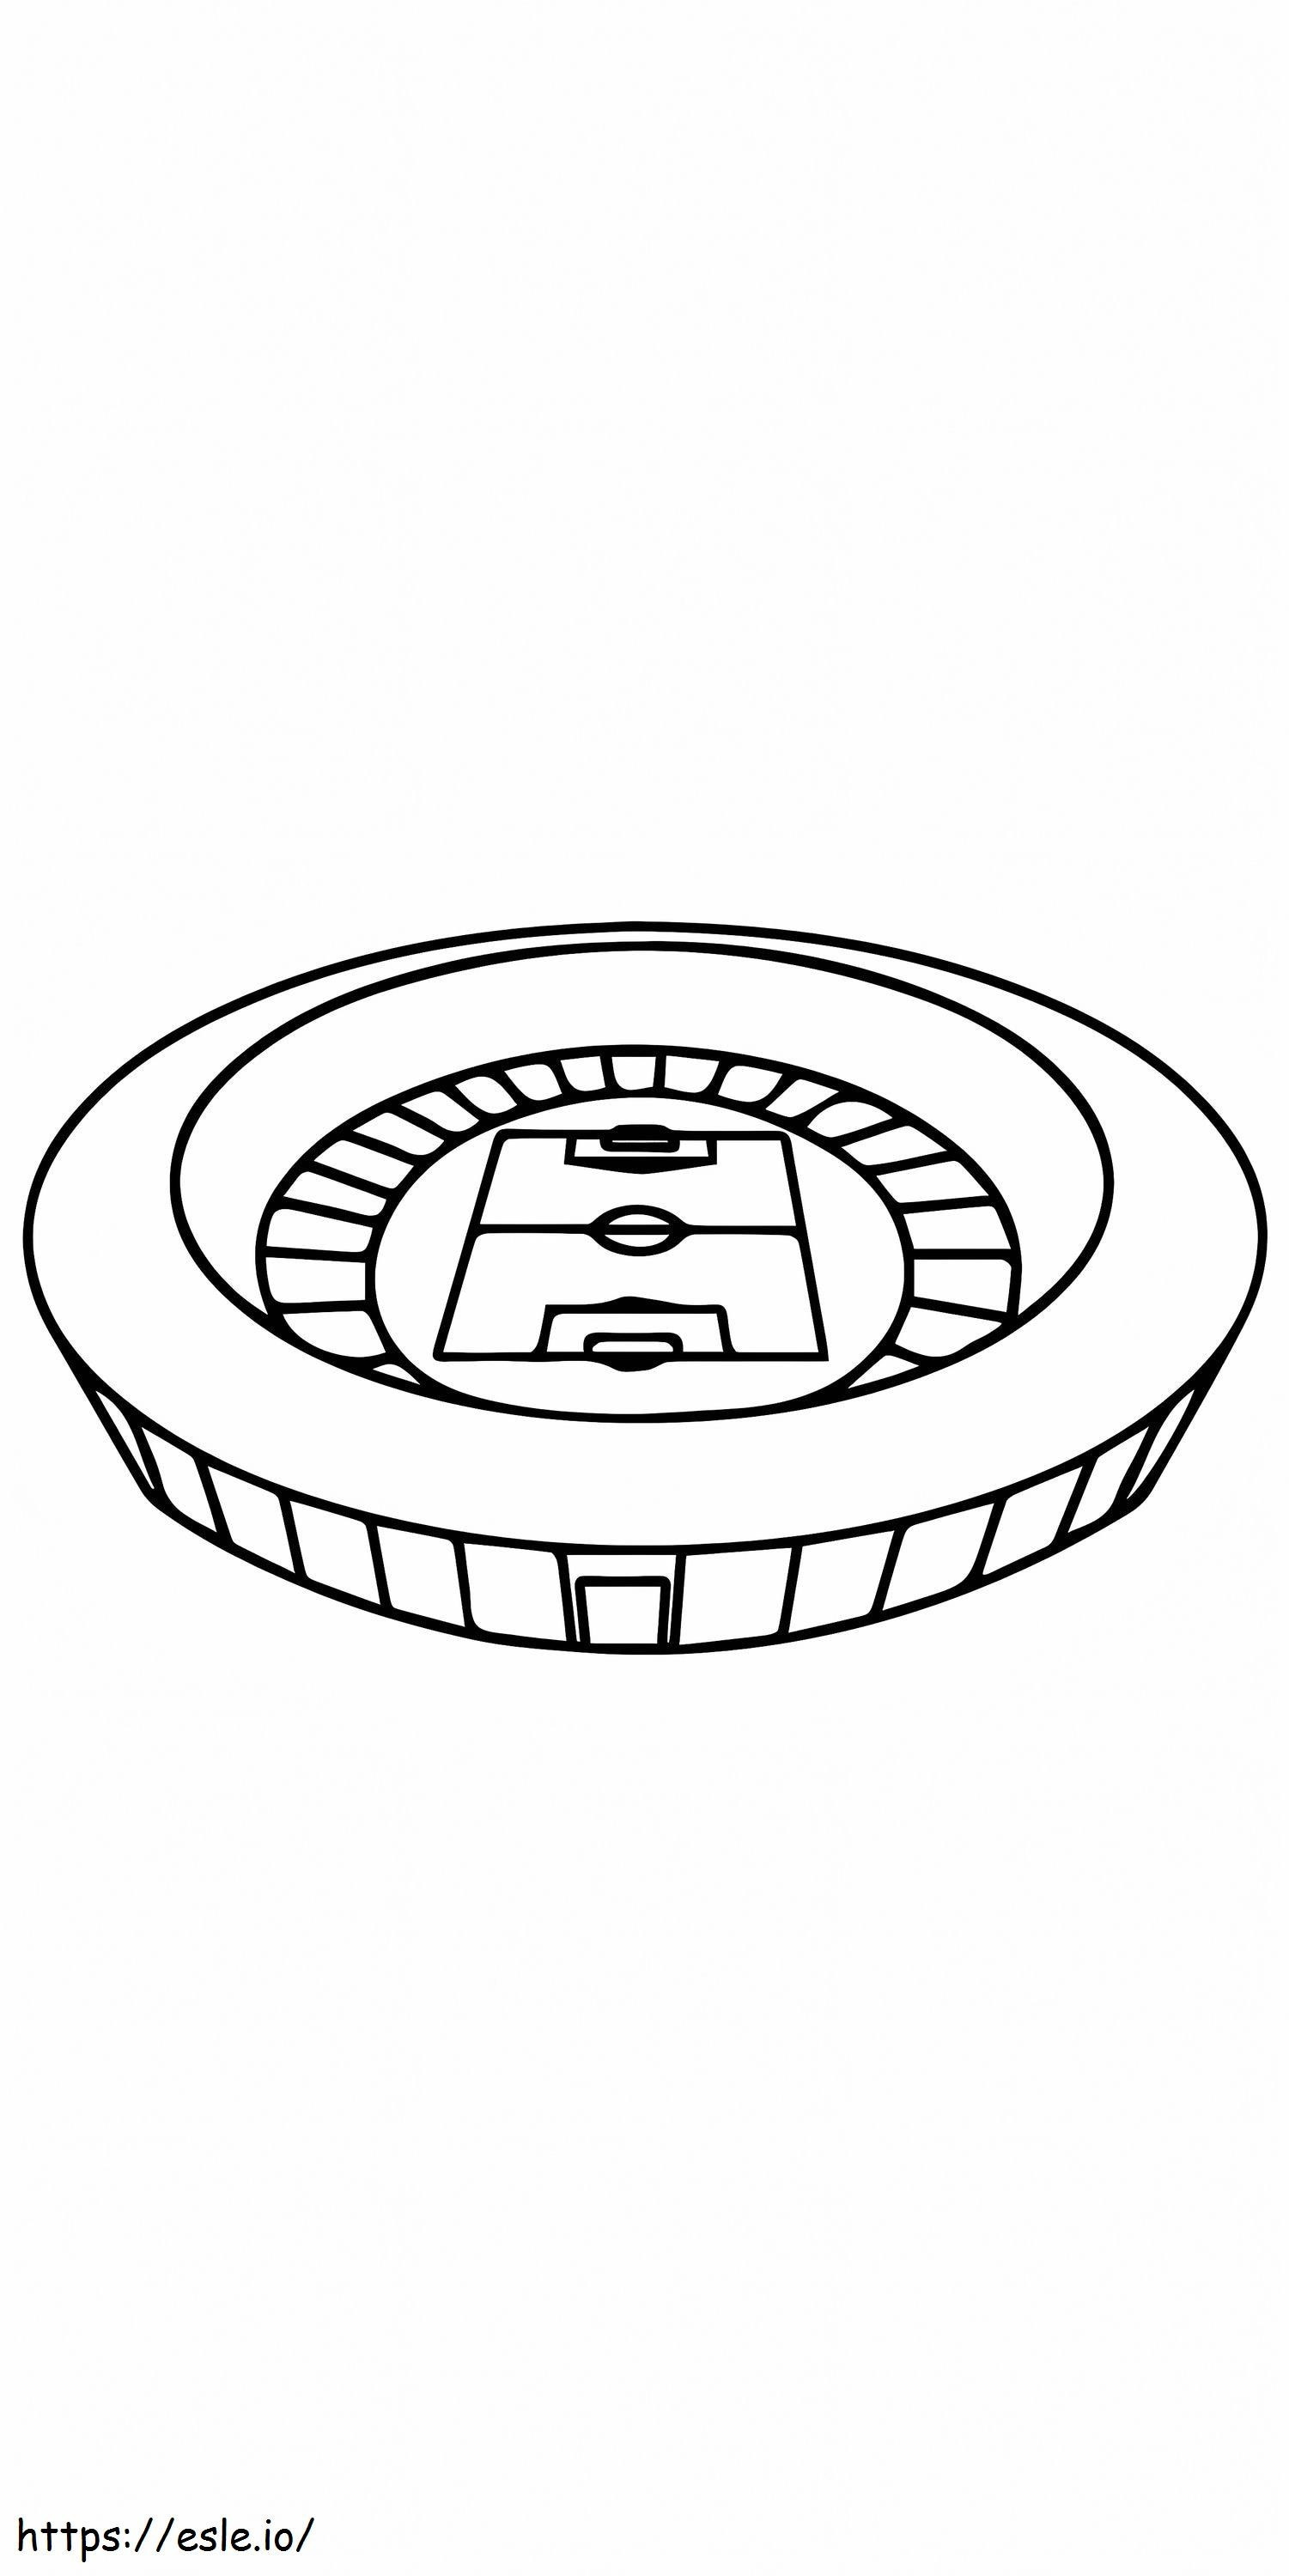 Small Stadium coloring page